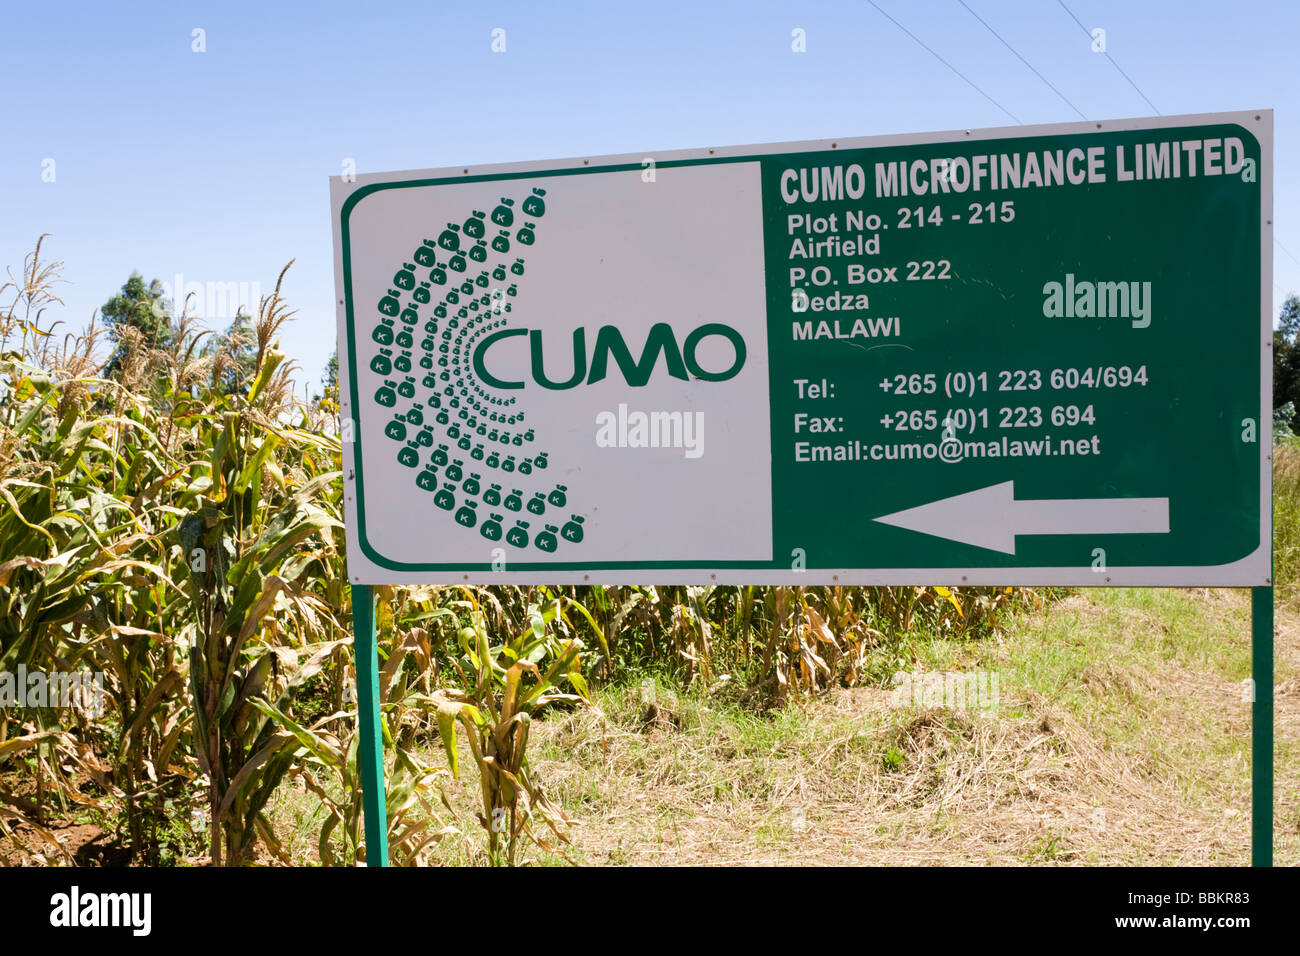 A sign for Cumo Microfinance Limited at Dedza, Malawi, Africa Stock Photo